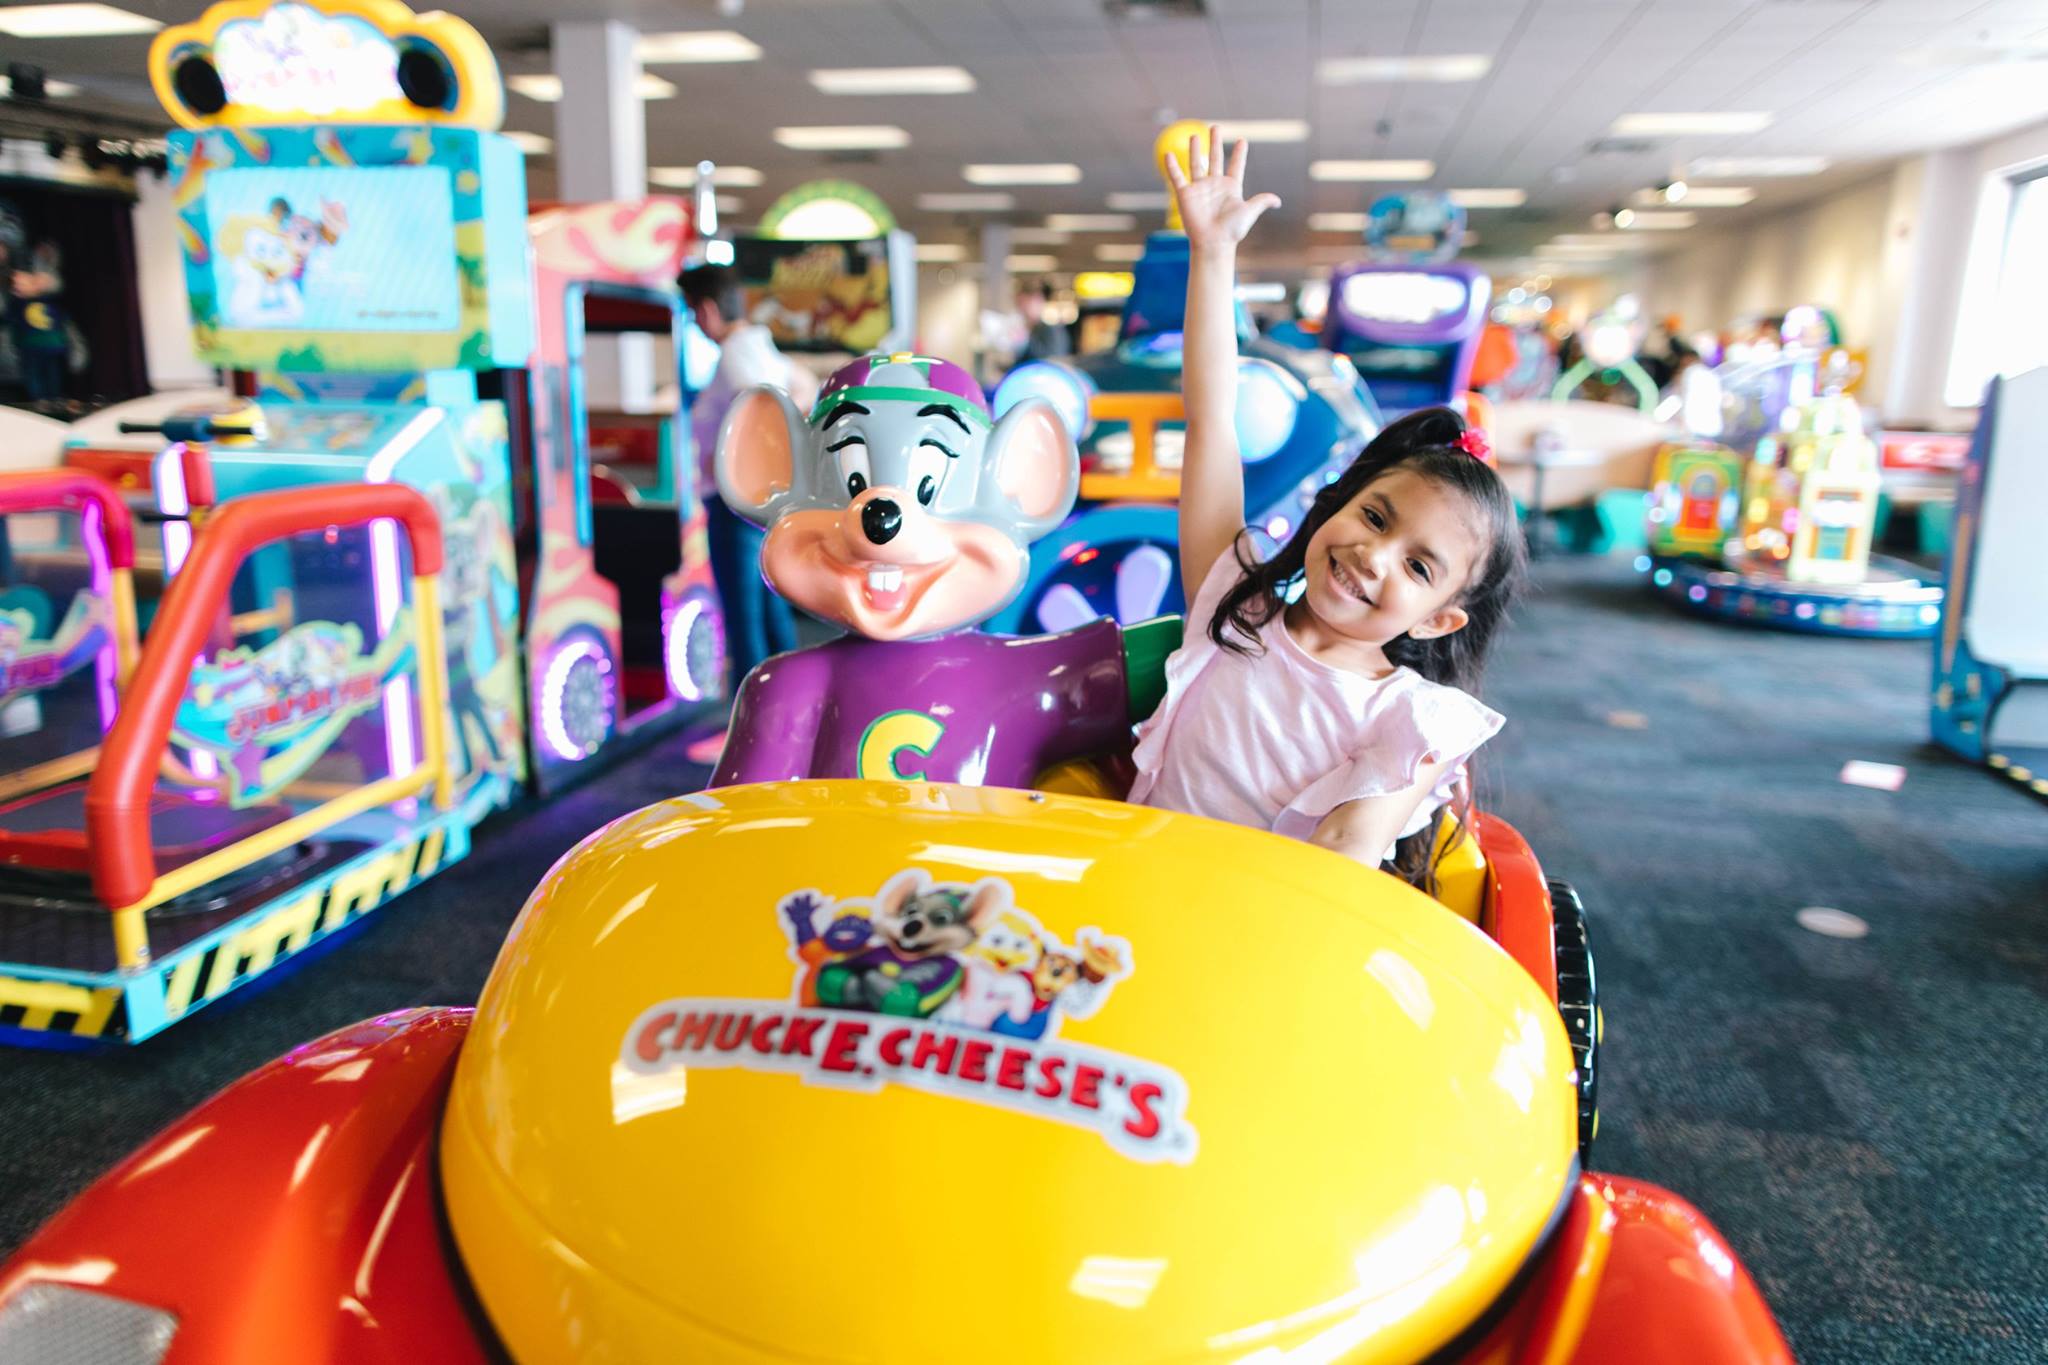 Buy $20 worth of games, get $20 at Chuck E. Cheese’s